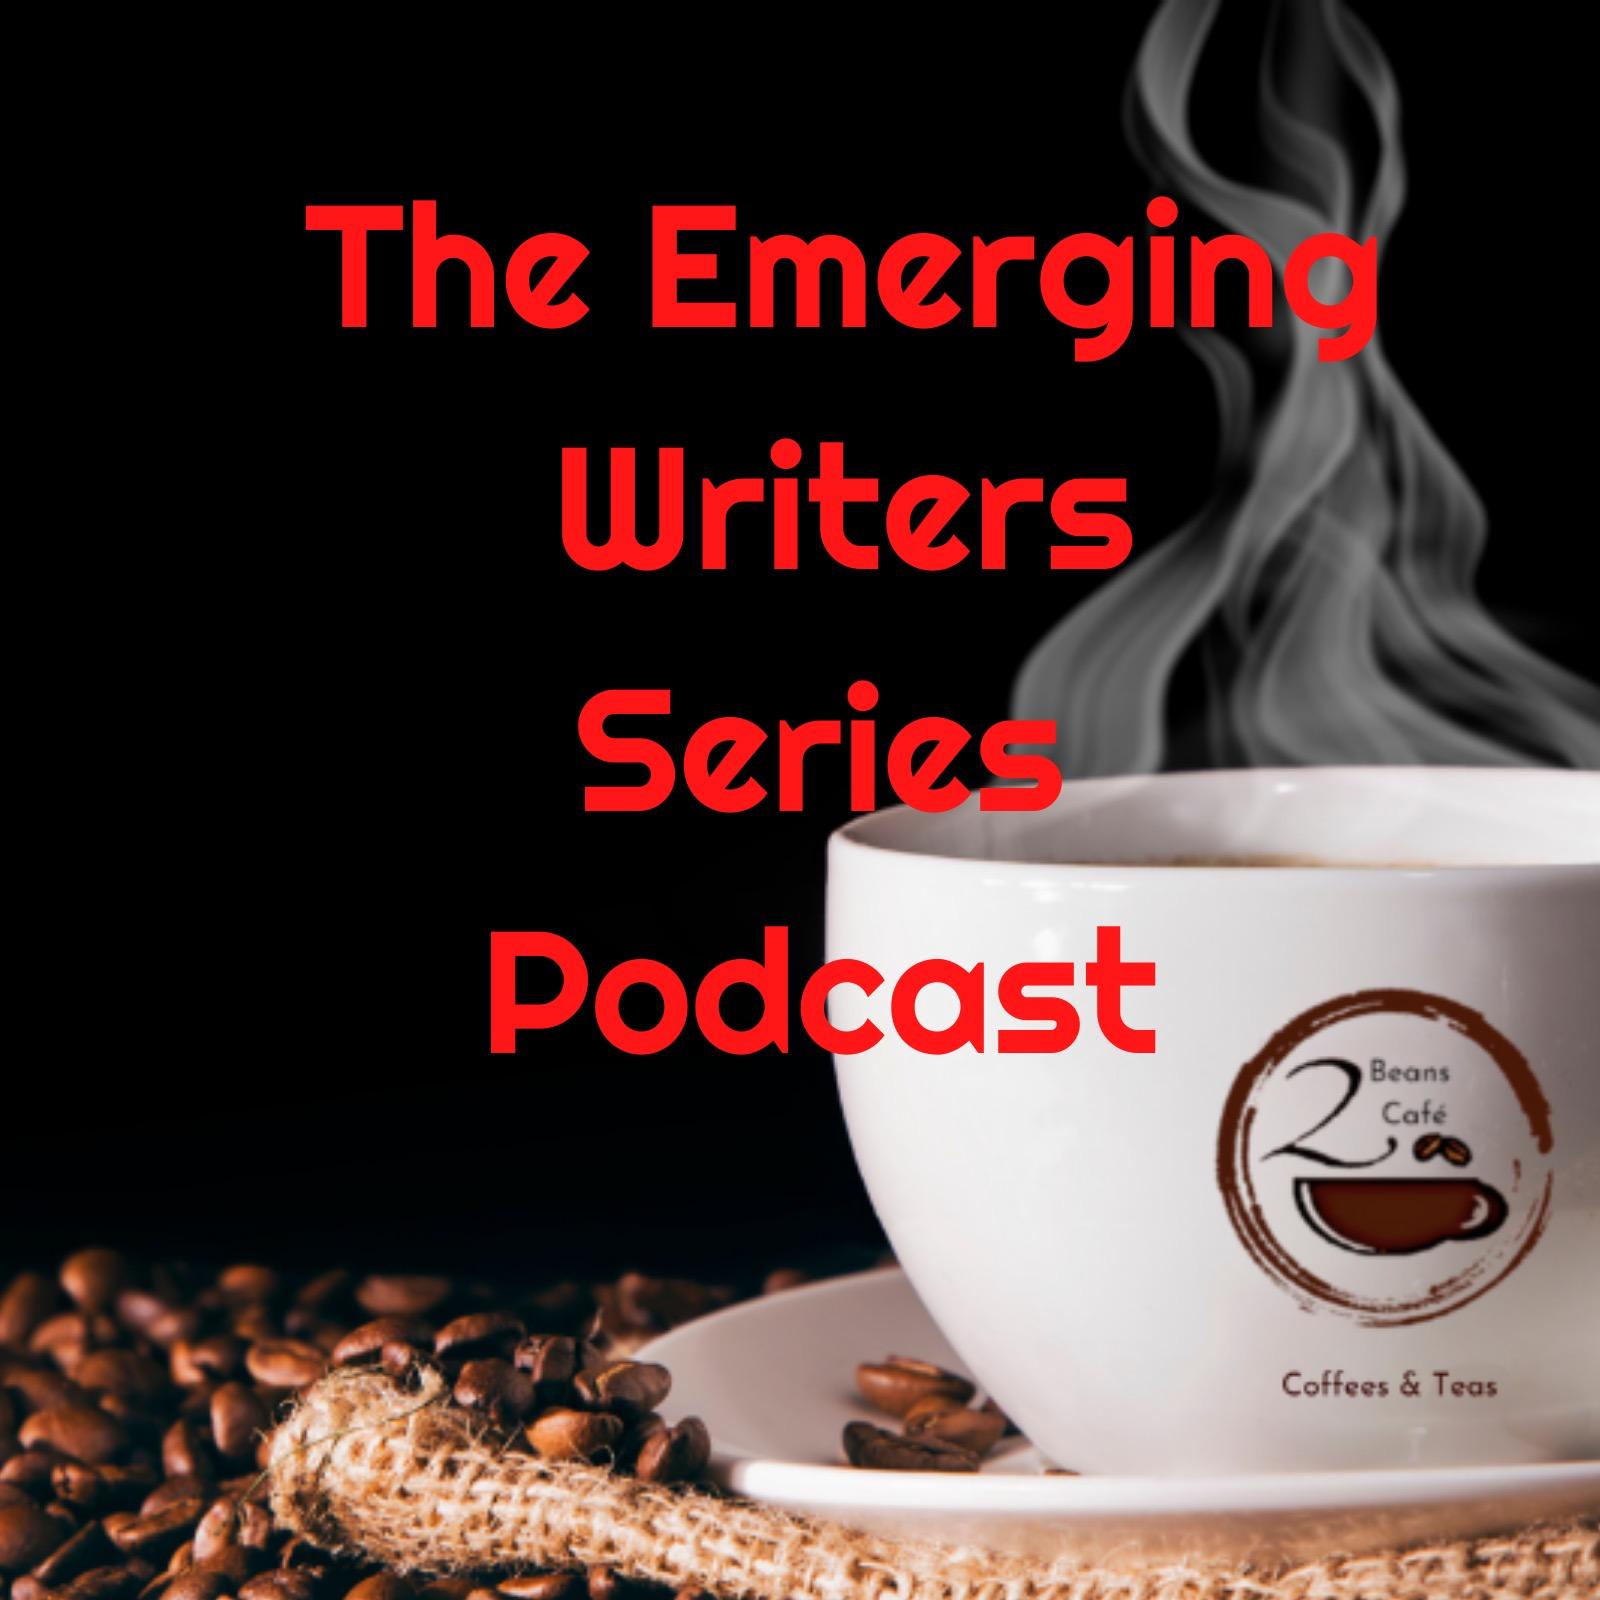 the Emerging Writers Series podcast